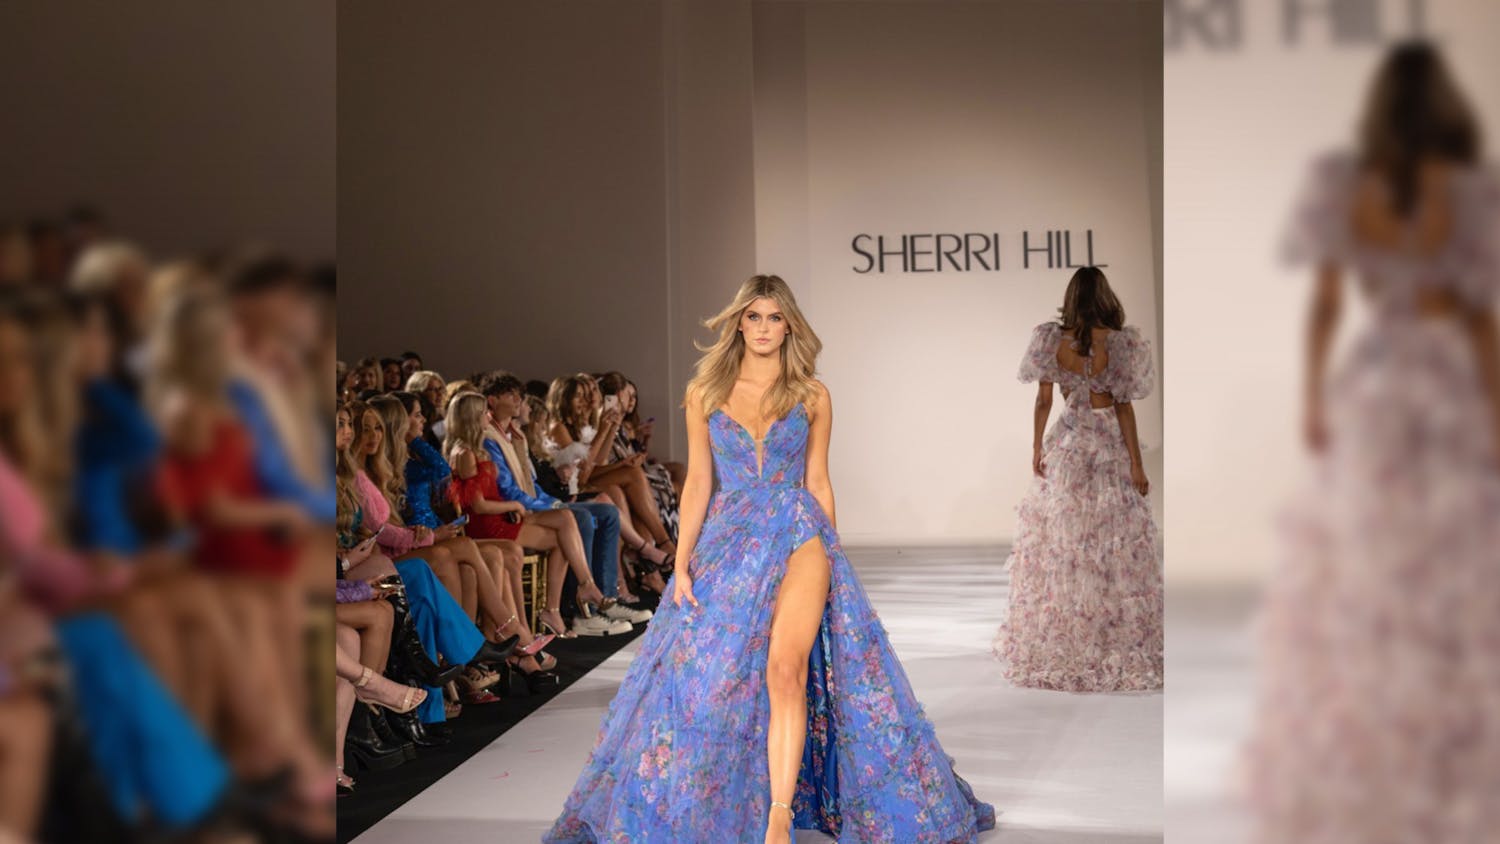 Second-year fashion merchandising and retailing student Augusta Roach strolls the runway wearing Sherri Hill at New York Fashion Week on Sept. 9, 2022. Roach says this experience was one of the greatest of her modeling career so far.&nbsp;